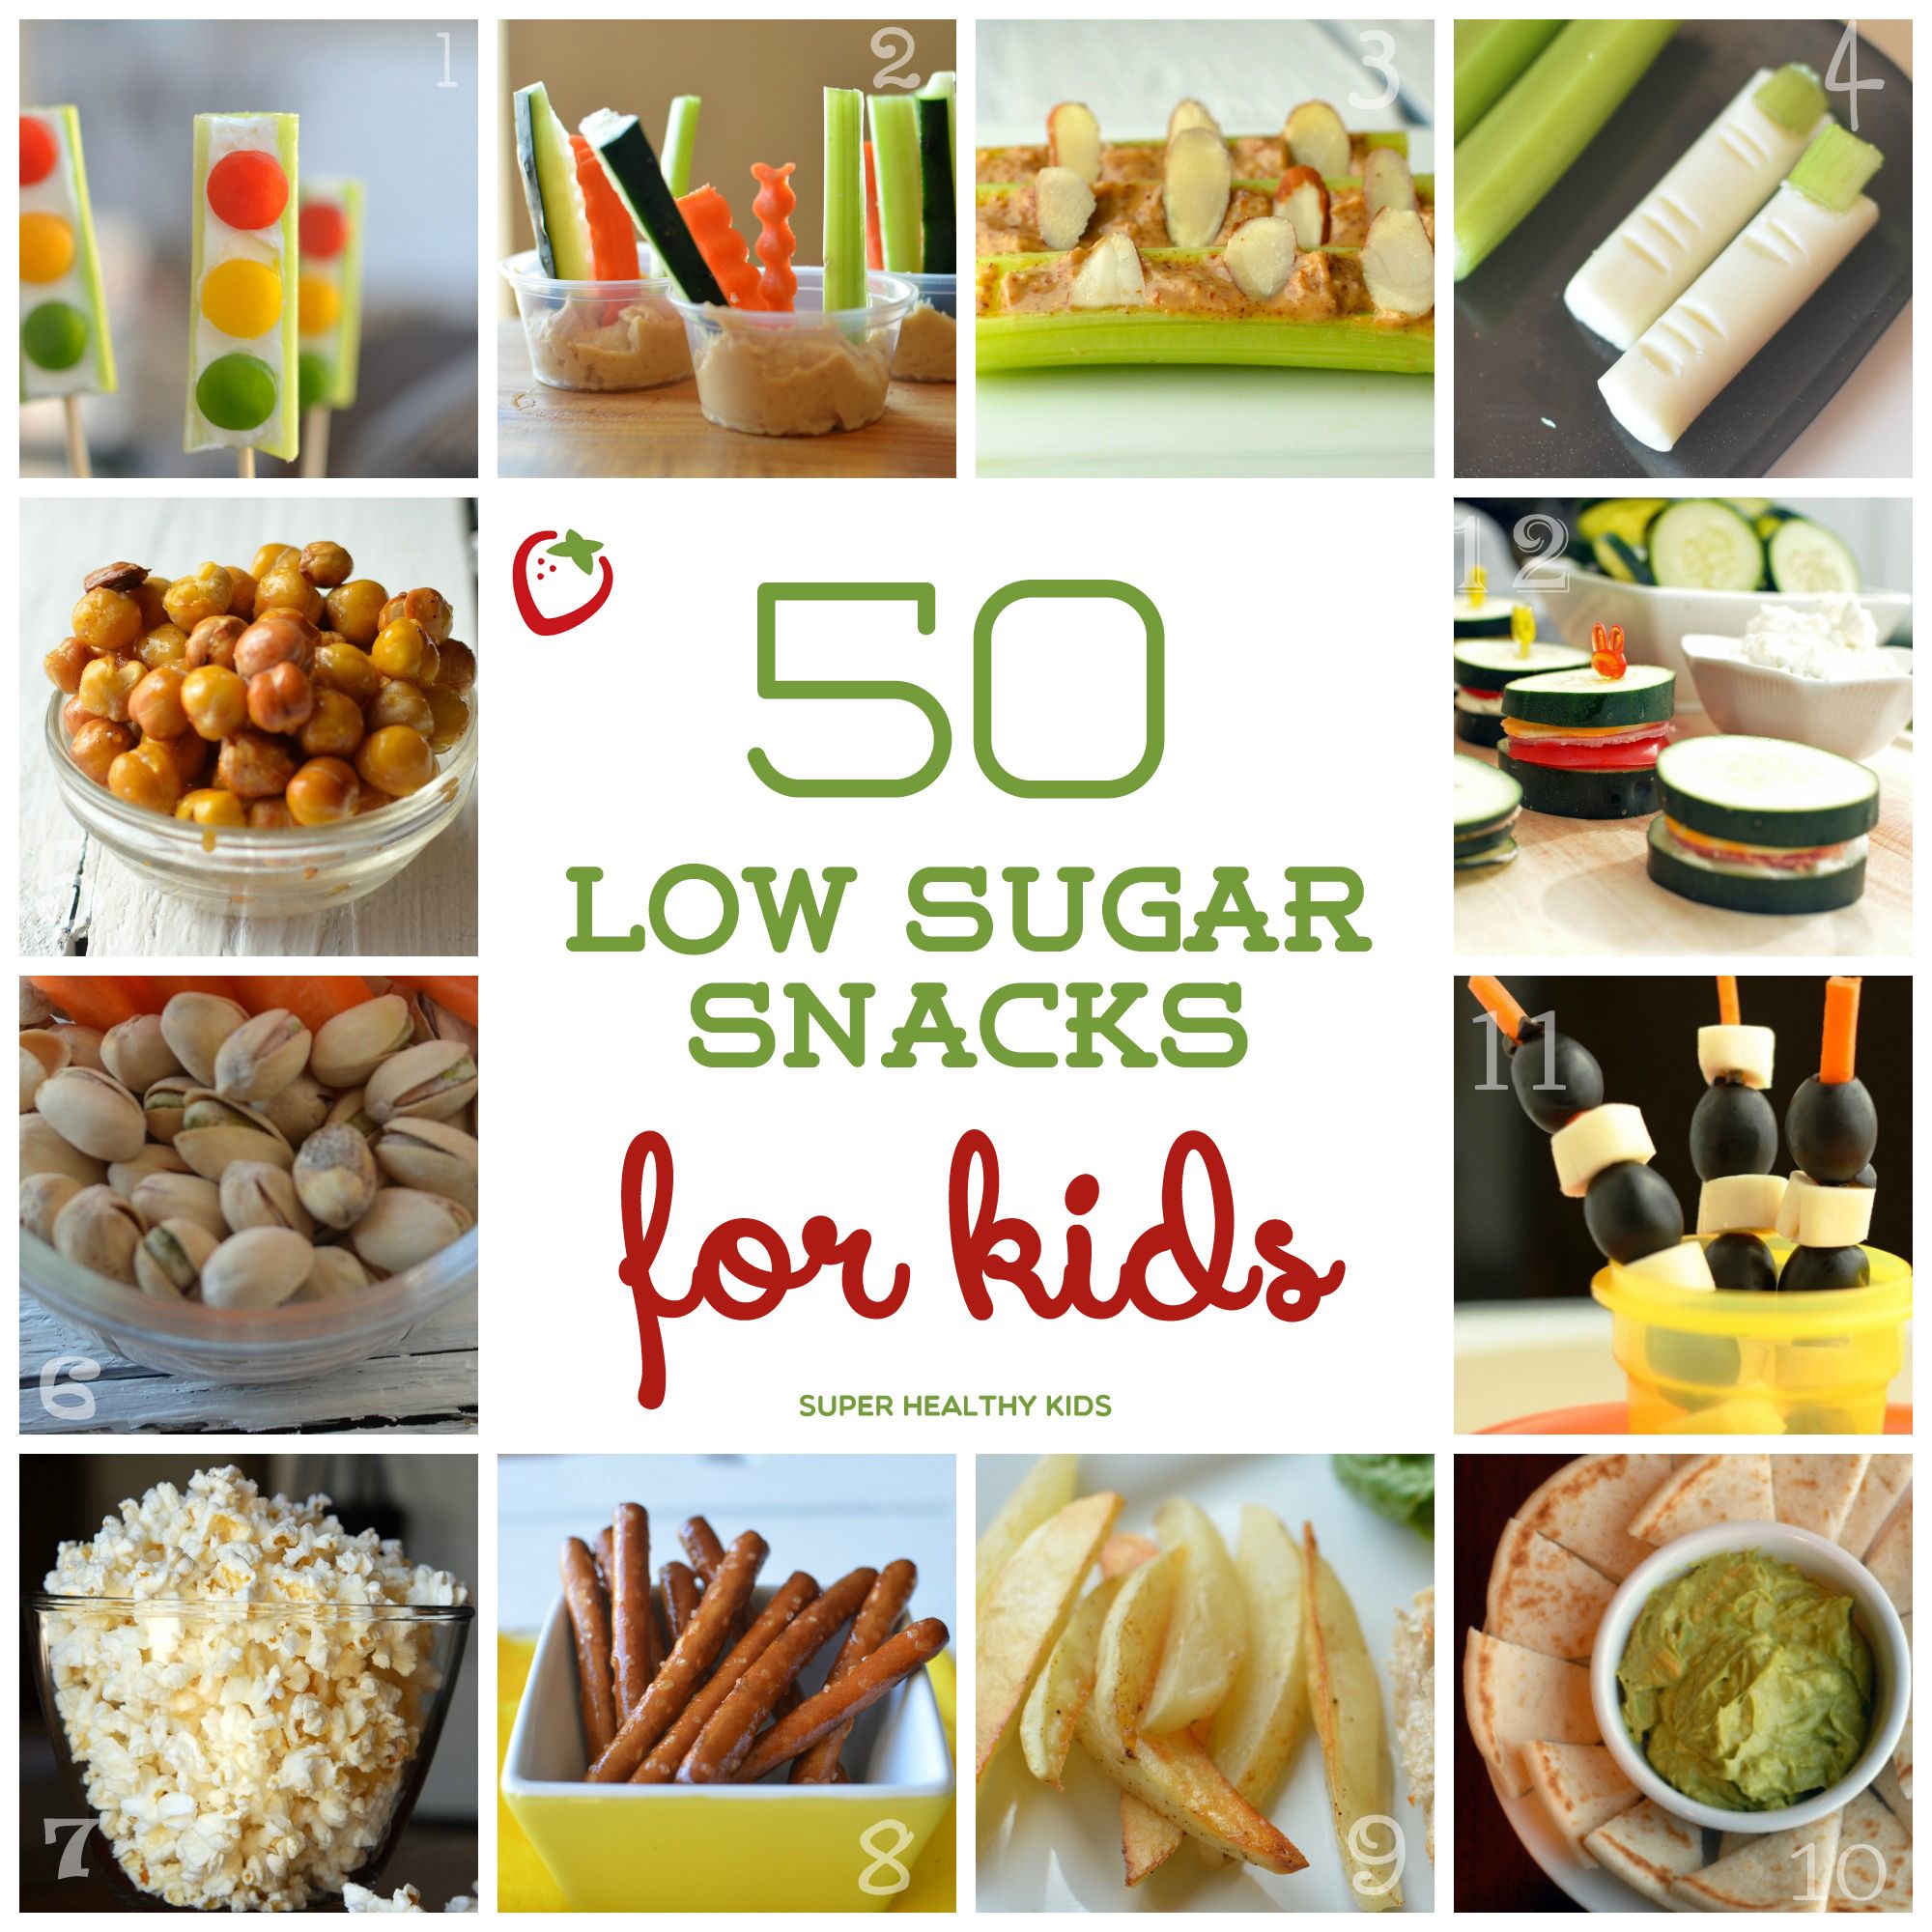 50 Low Sugar Snacks For Kids (and Everyone else!)